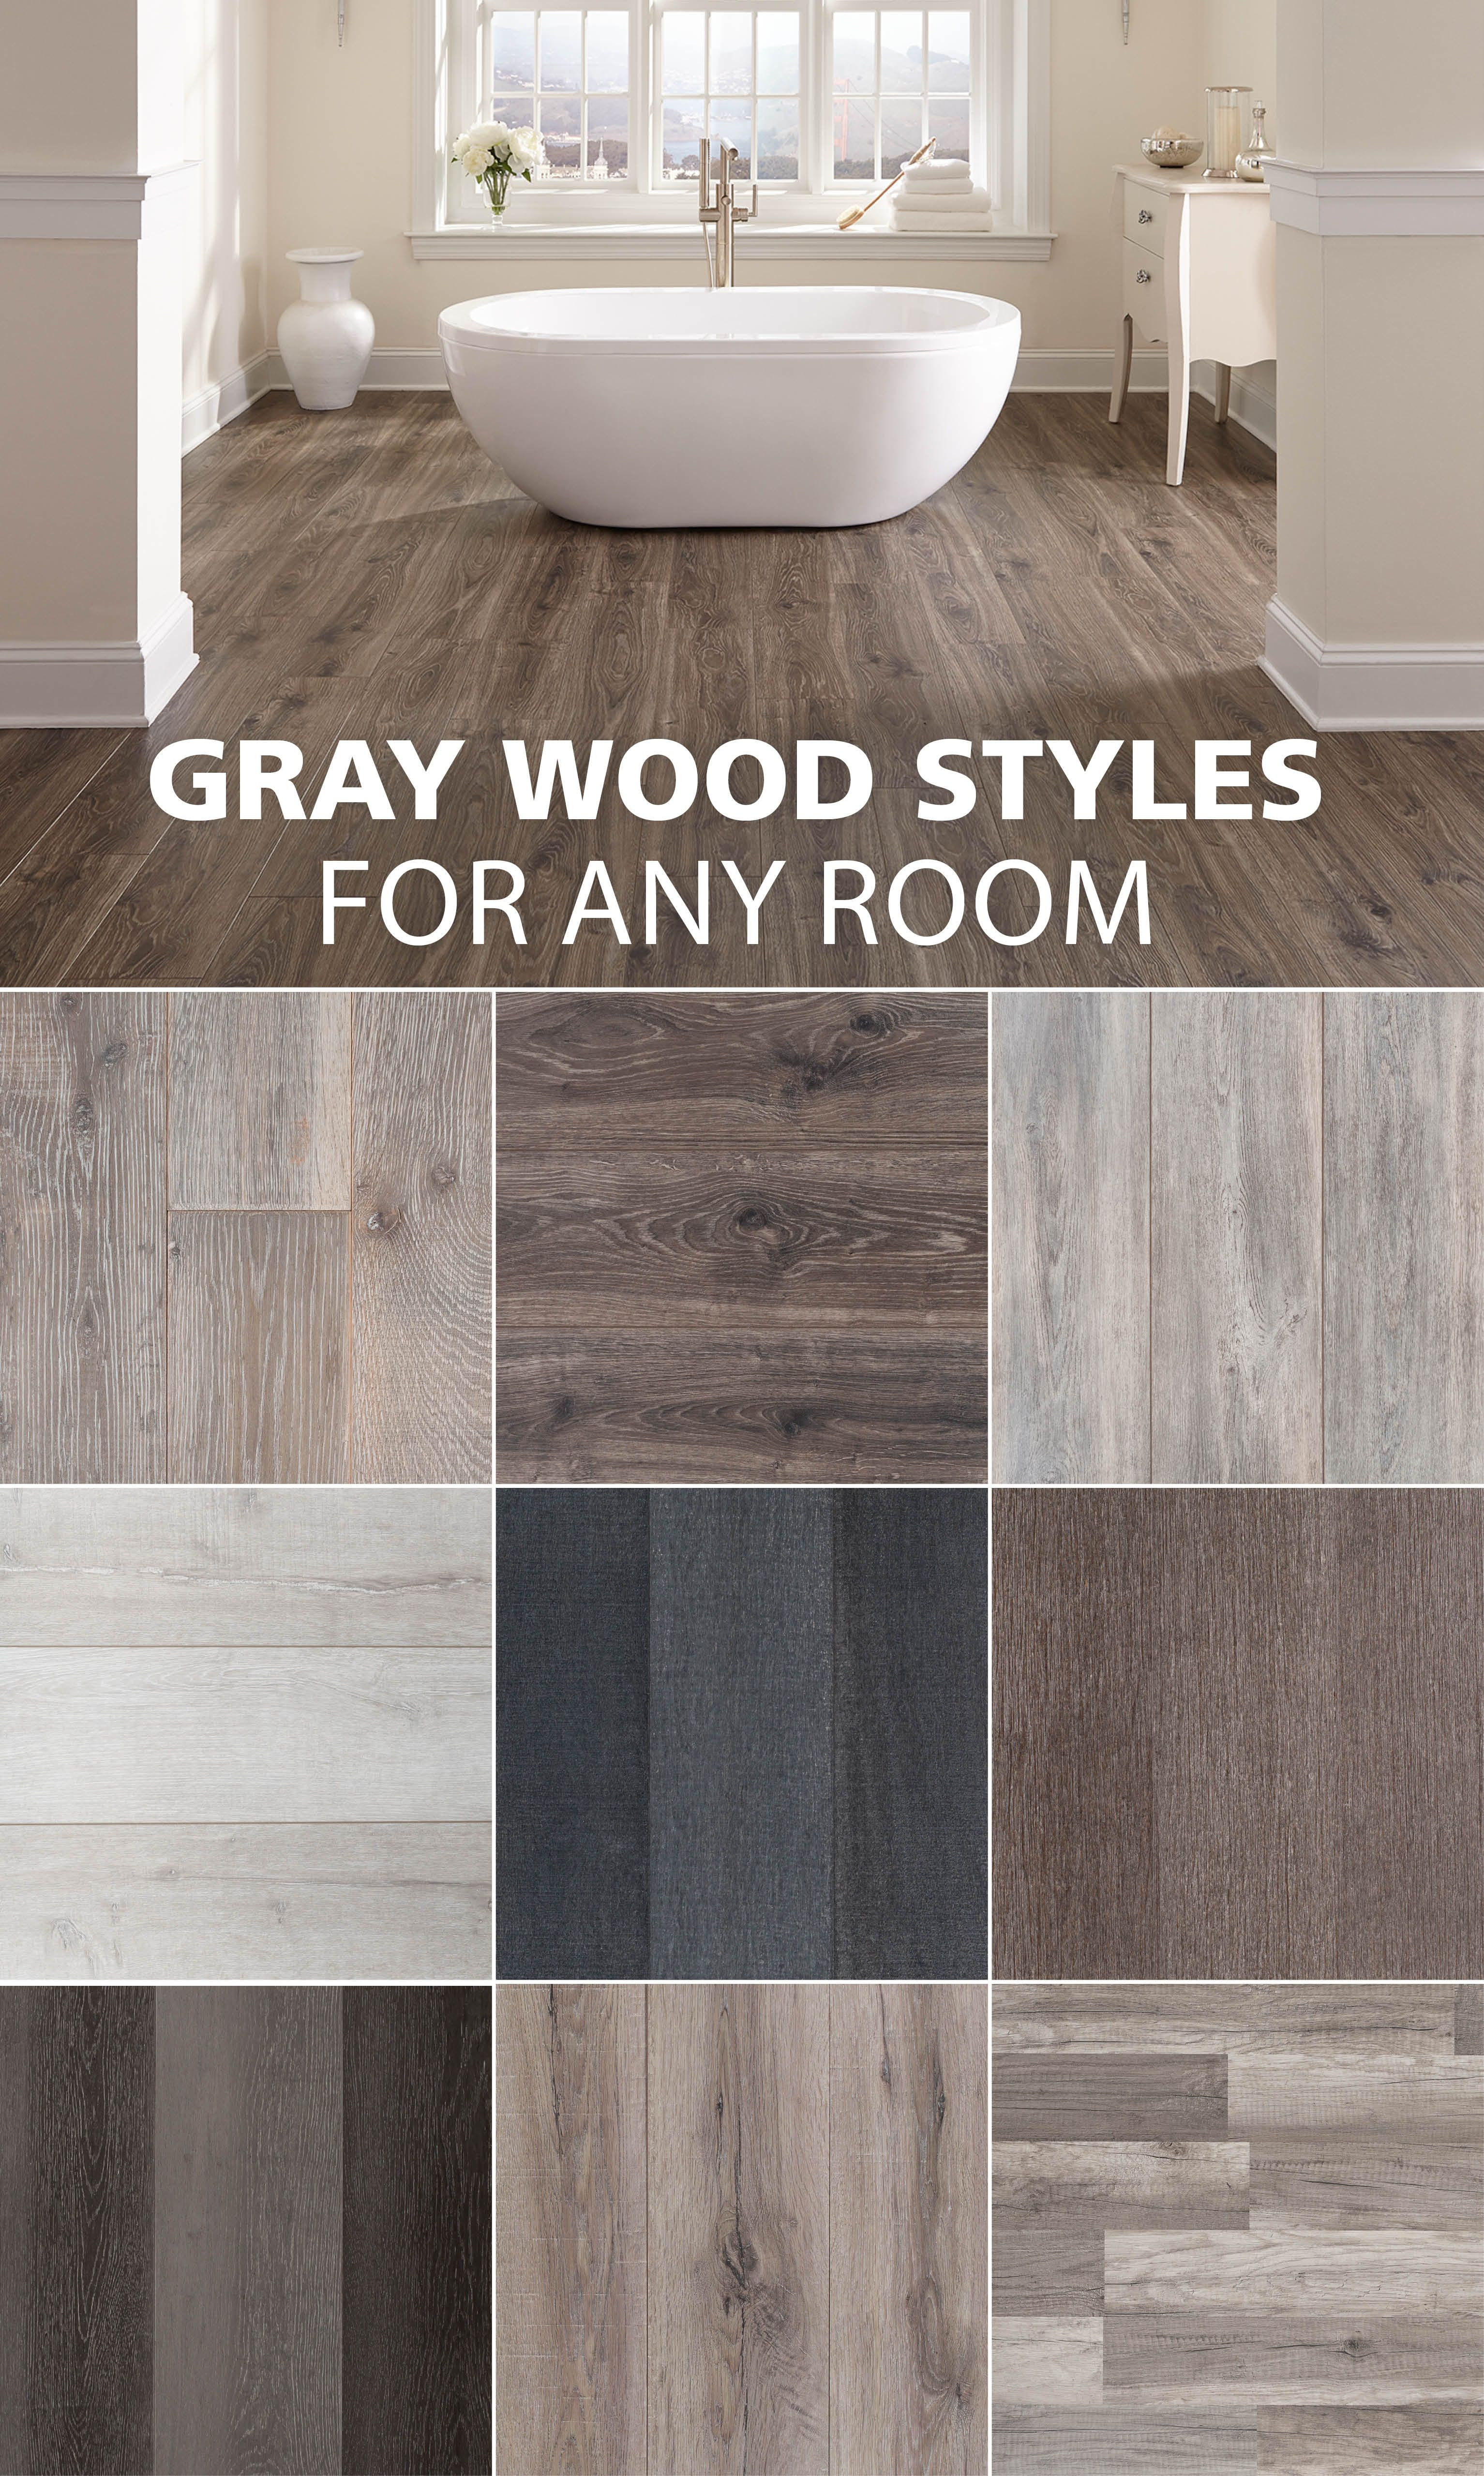 popular hardwood floor stain colors of here are some of our favorite gray wood look styles home decor inside here are some of our favorite gray wood look styles gray hardwood floors light